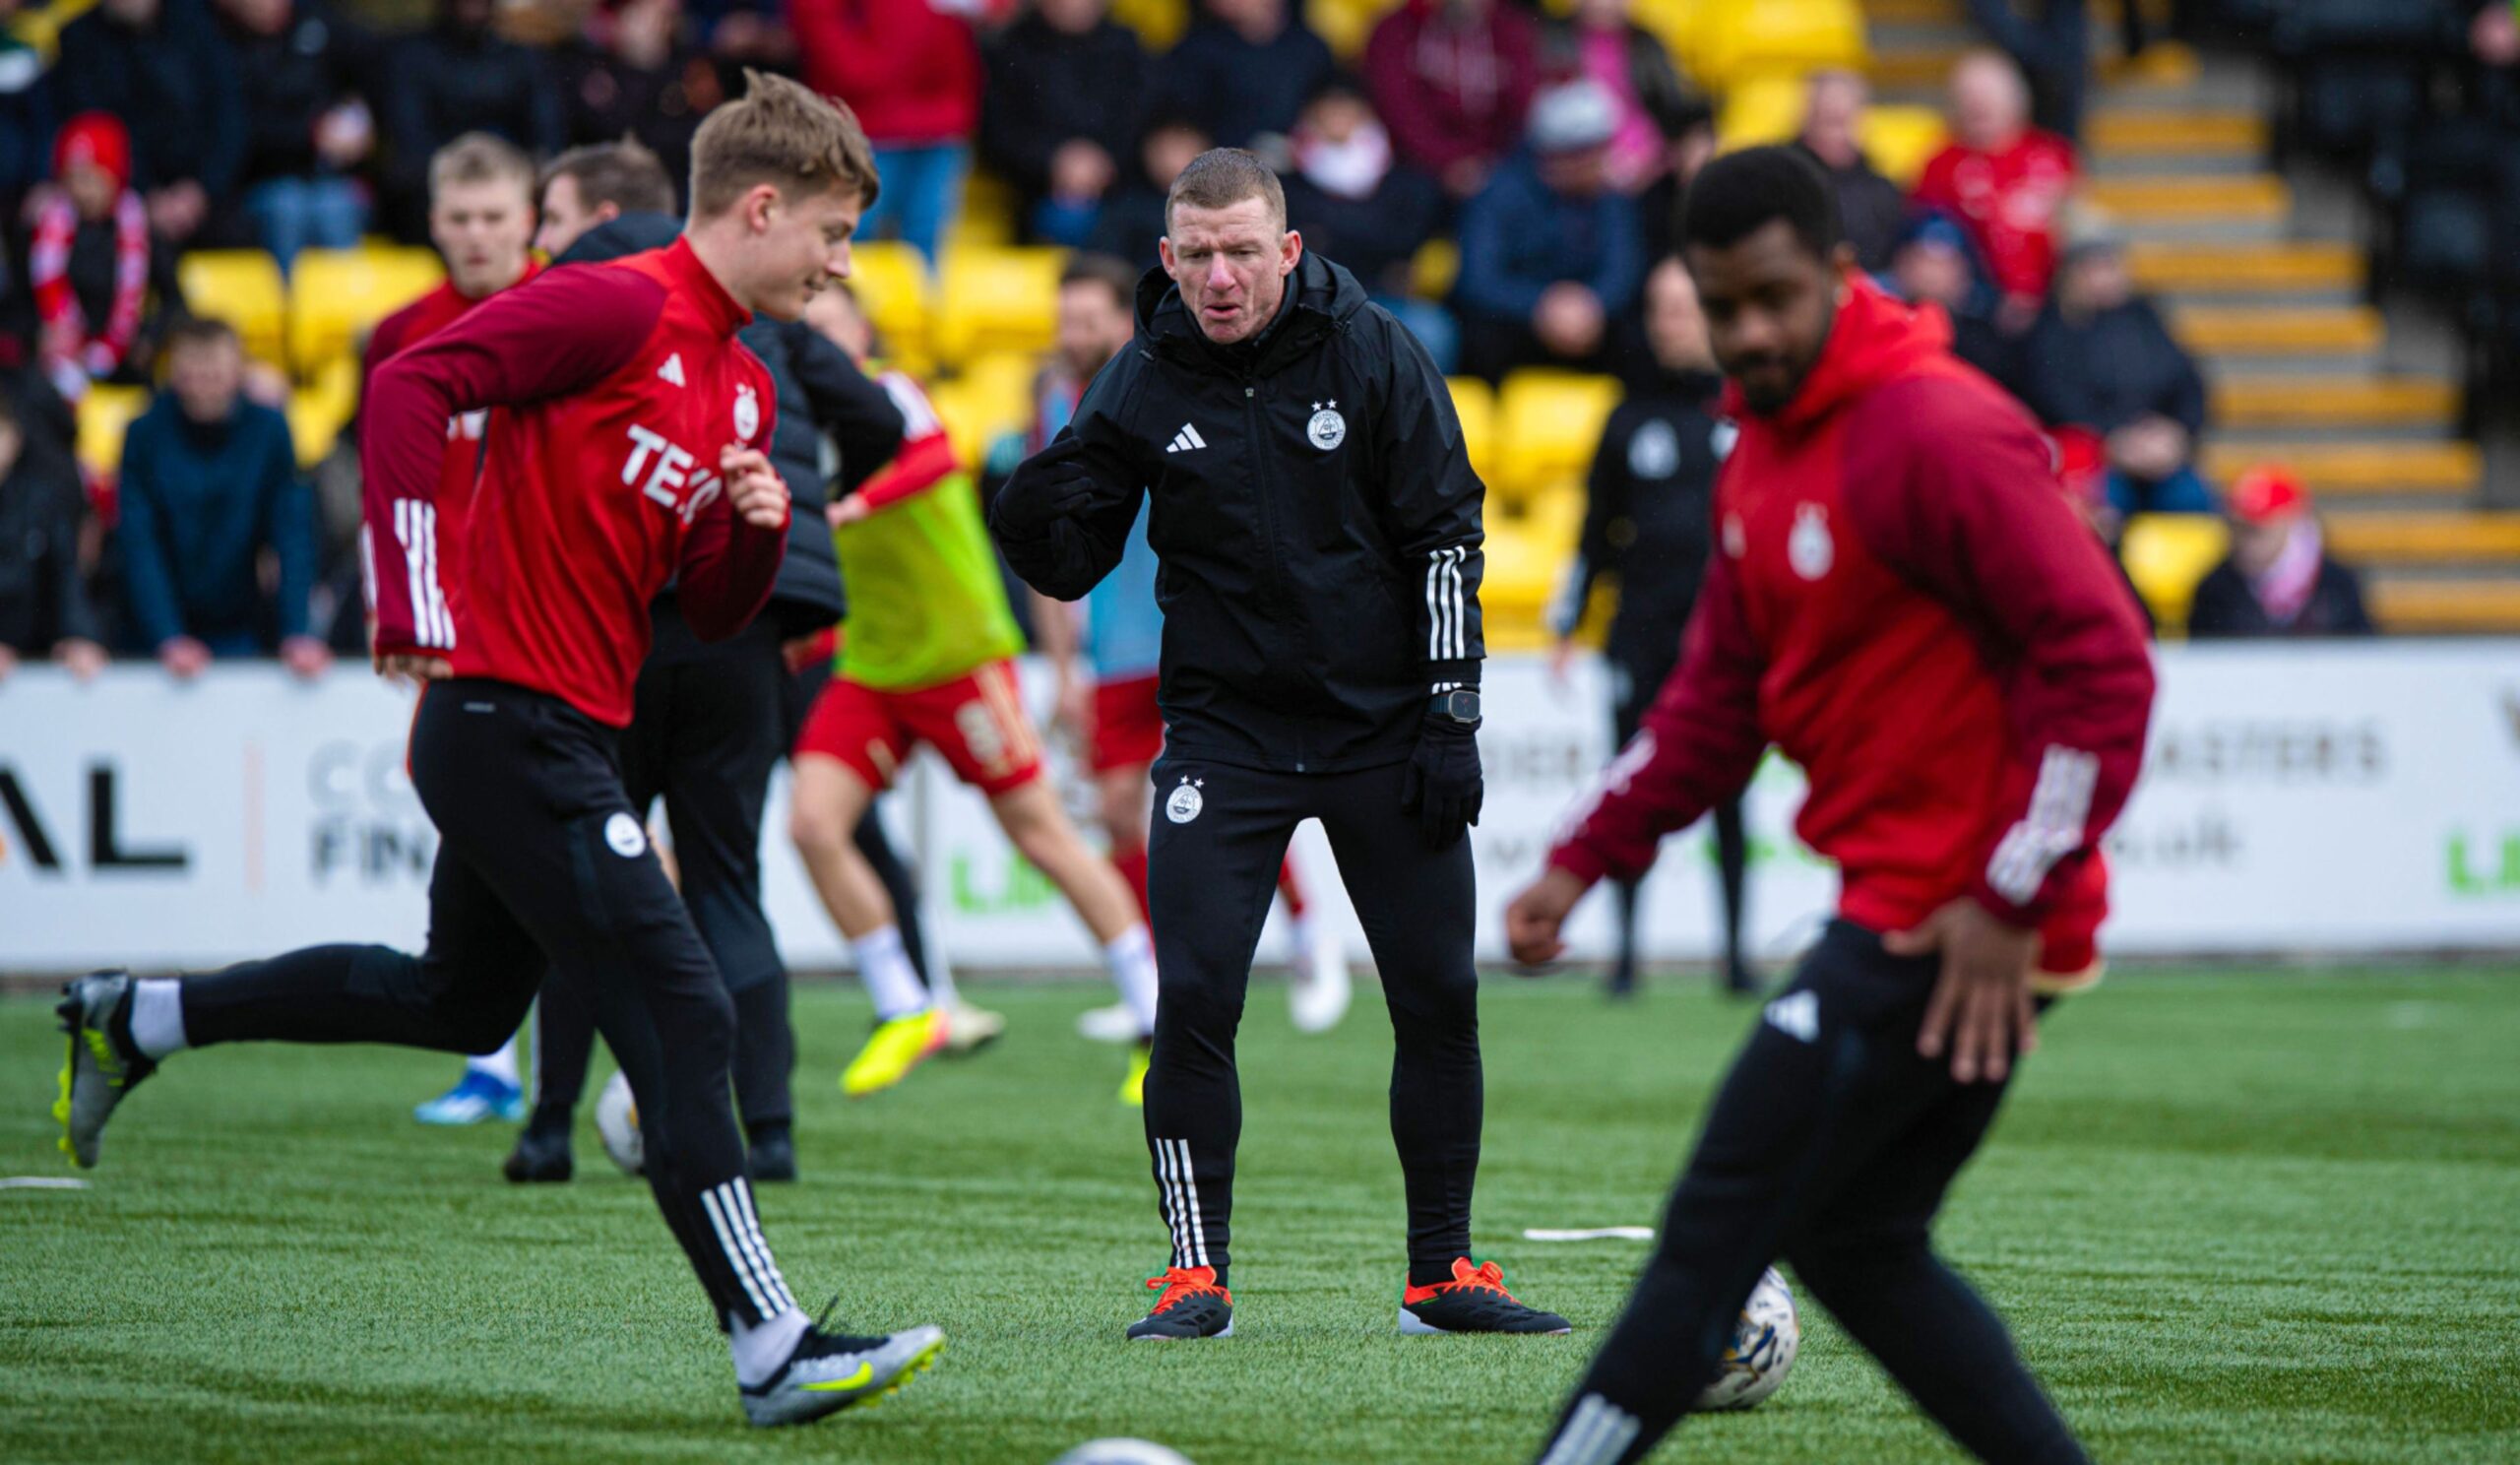 Aberdeen's Jonny Hayes coaching during warmups ahead of the league match at Livingston in April. Image: SNS 